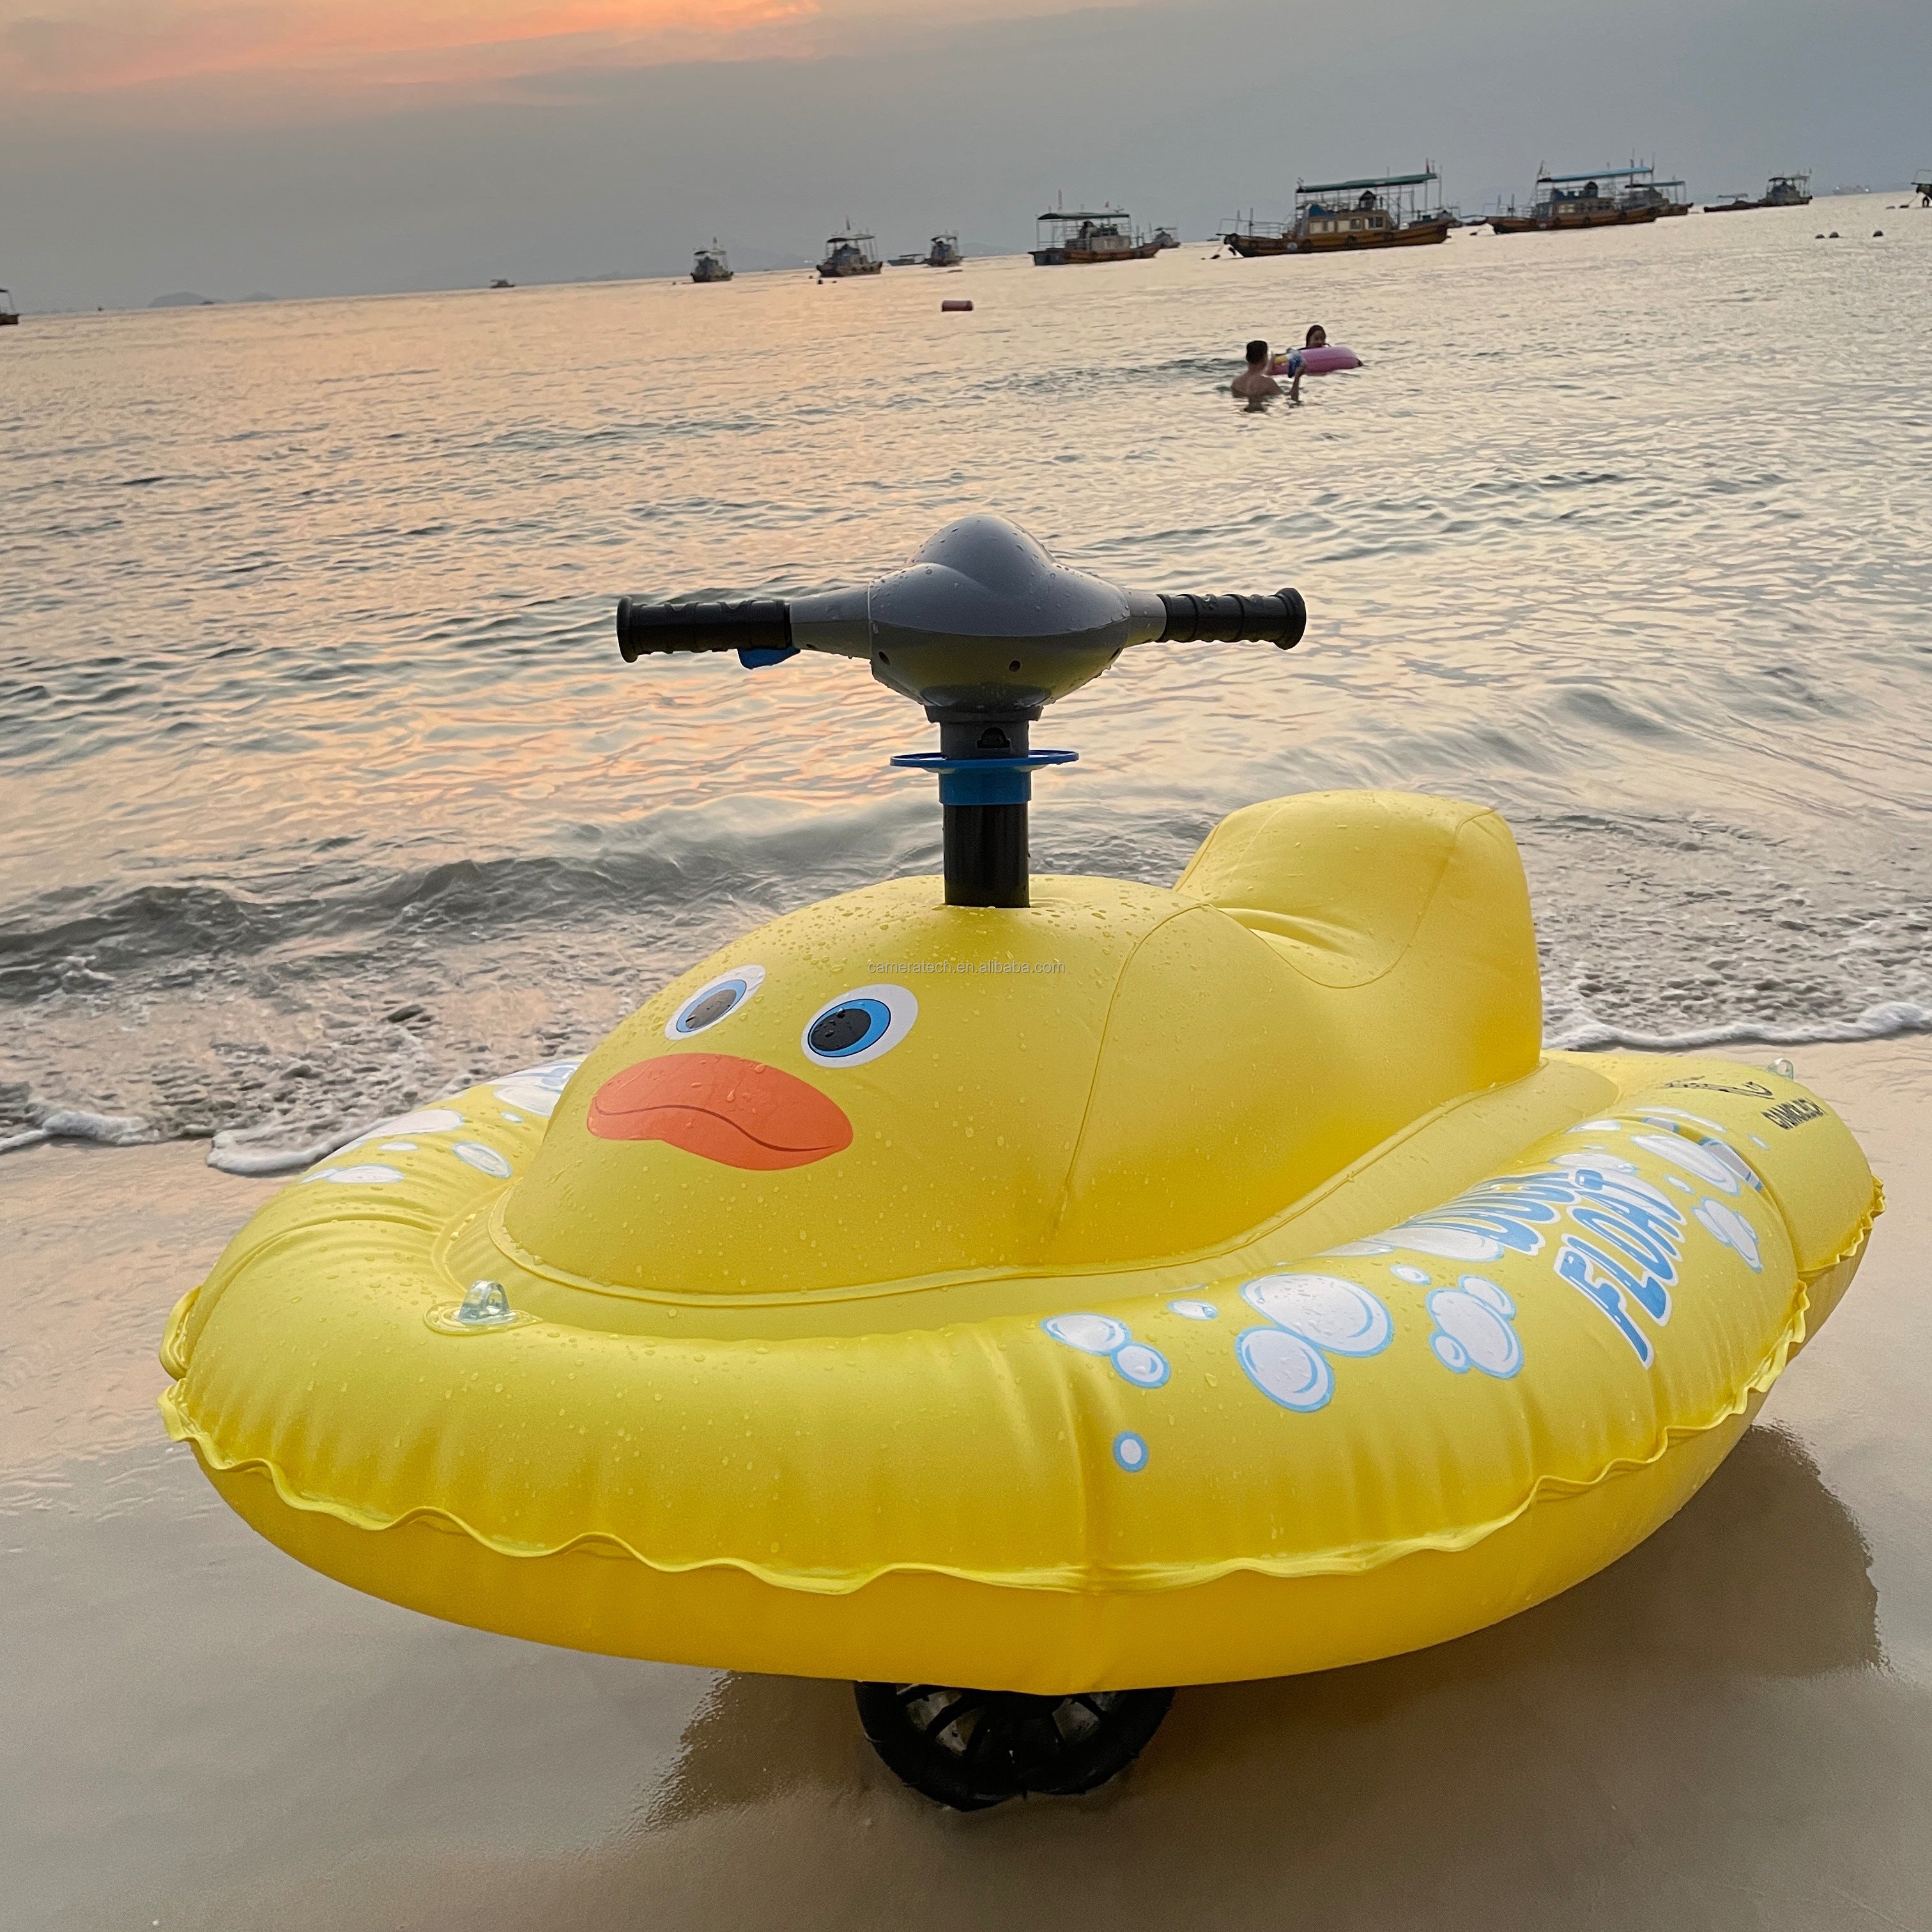 GCAMOLECH W5 children's water toys electric  boat motor jet ski double watercraft swimming pool electric motorboat | Electrr Inc